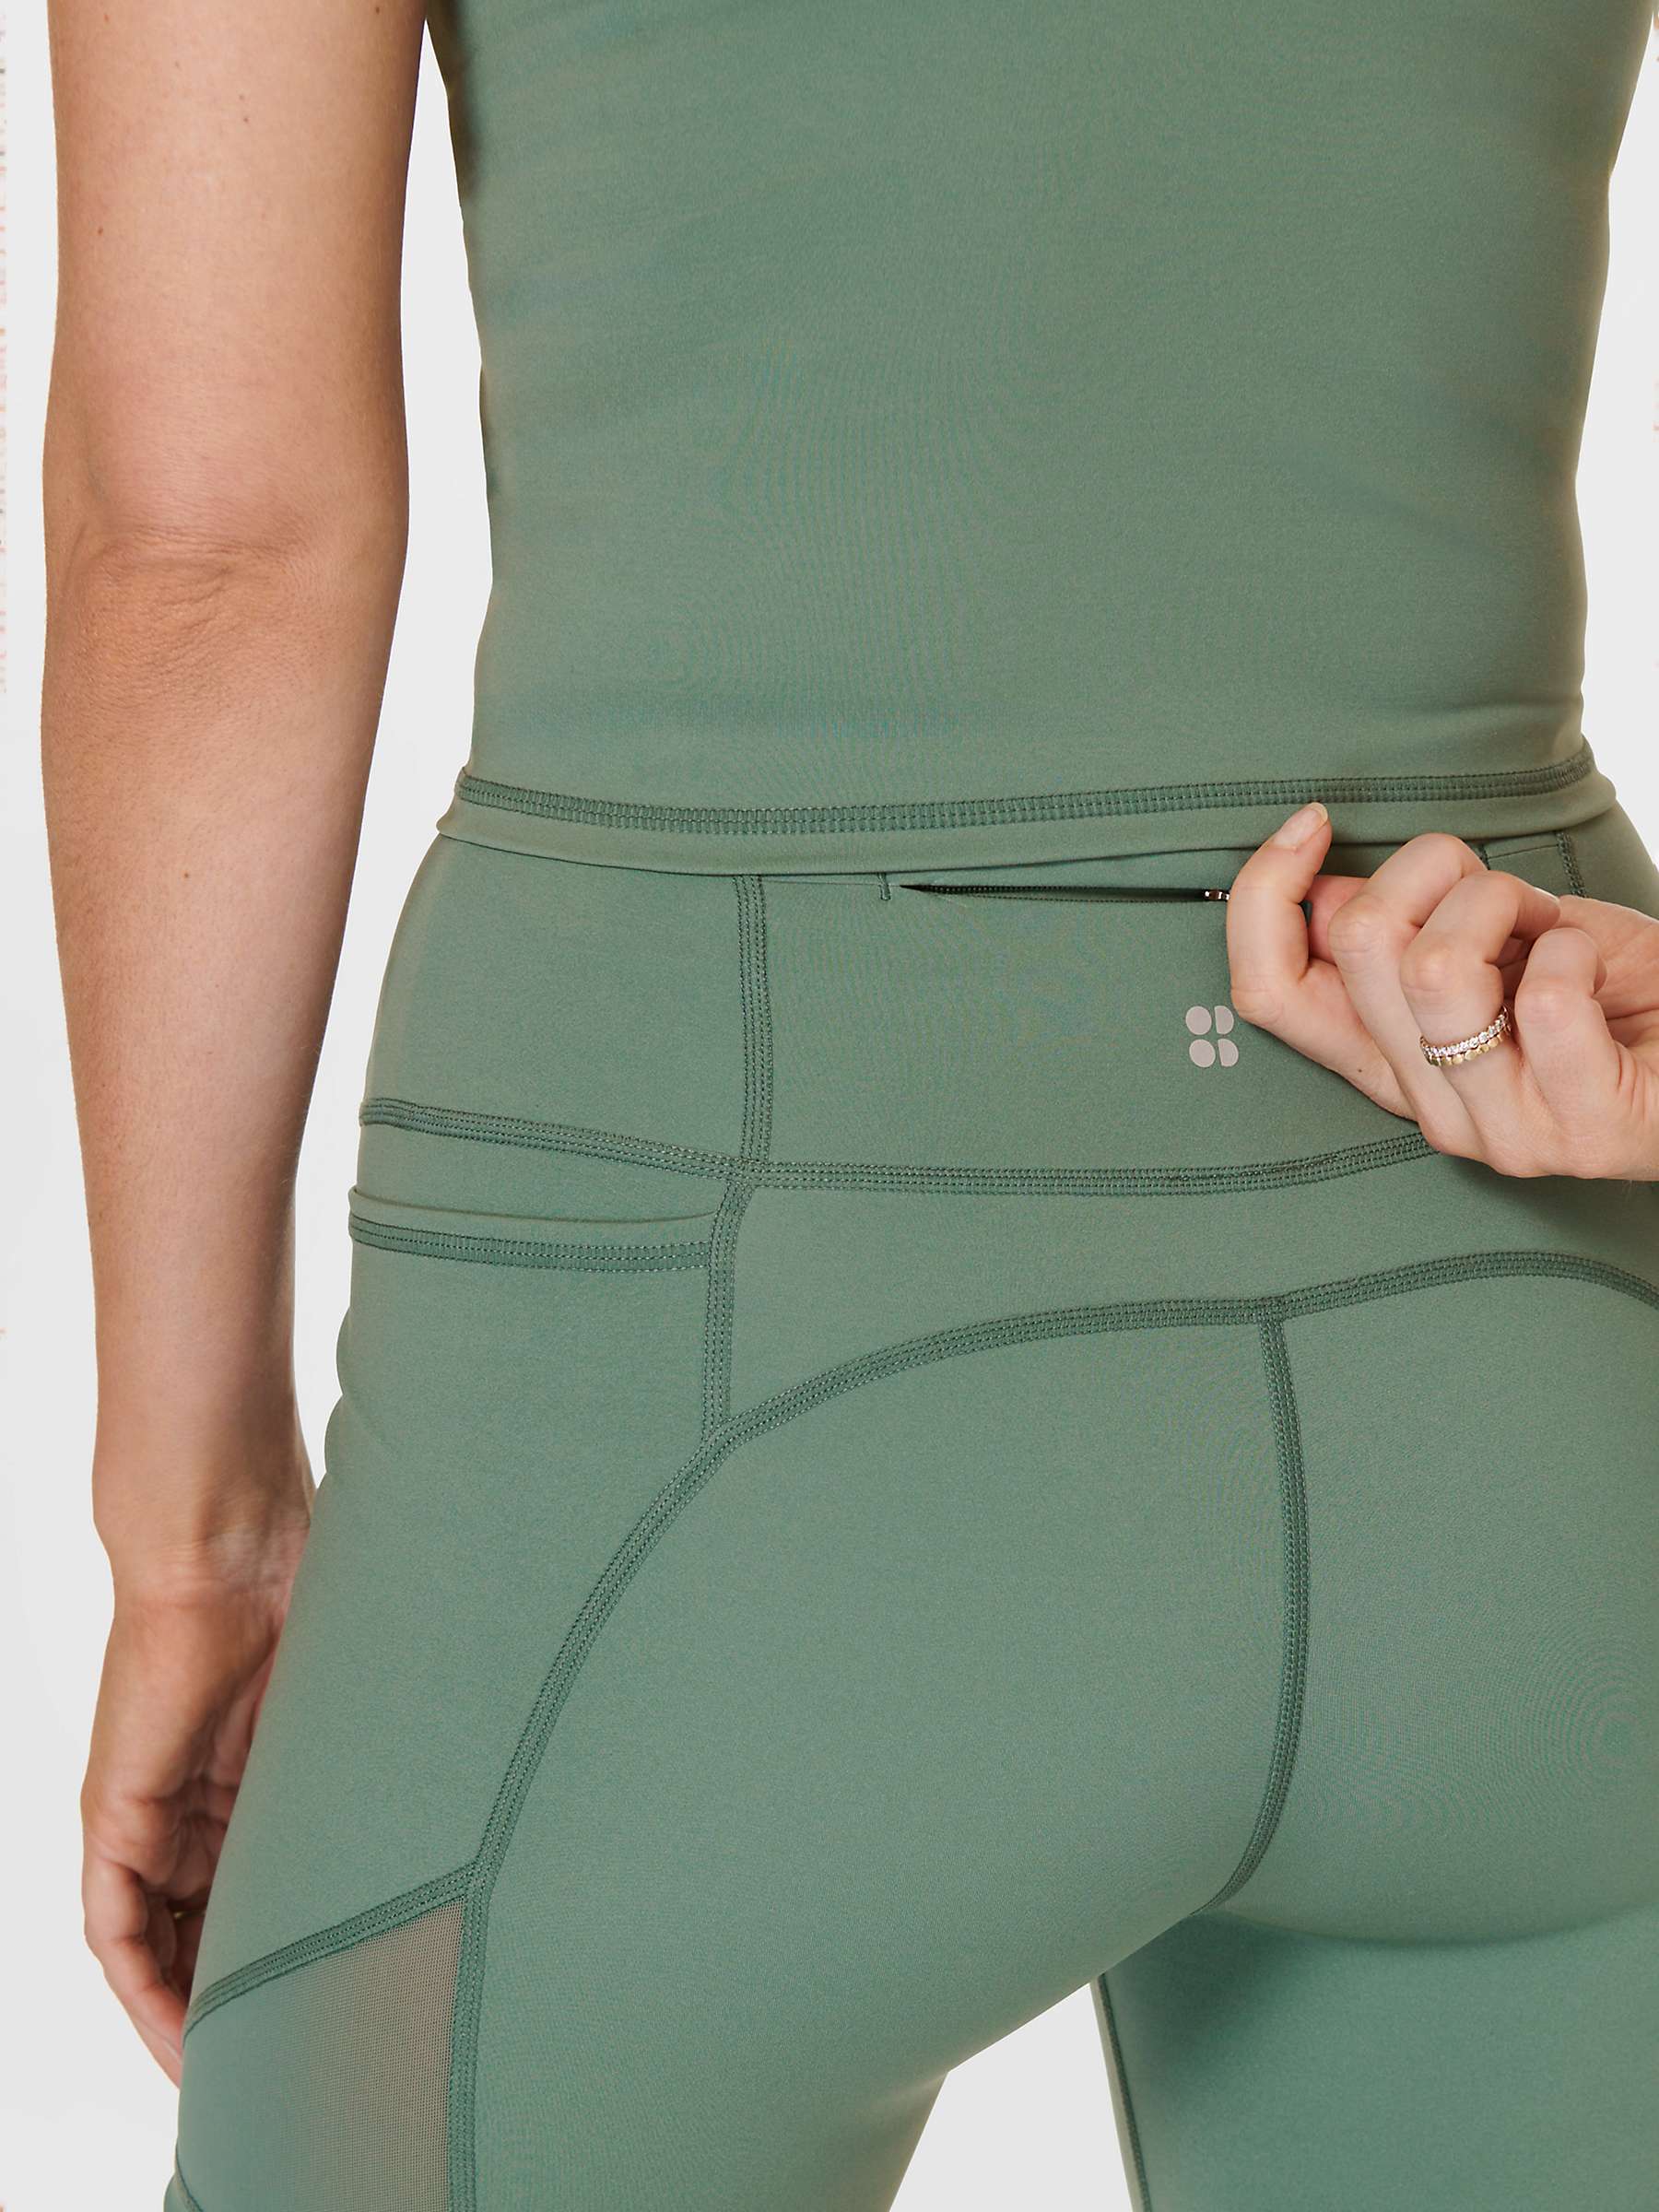 Buy Sweaty Betty Aerial 6" Workout Shorts, Cool Forest Green Online at johnlewis.com